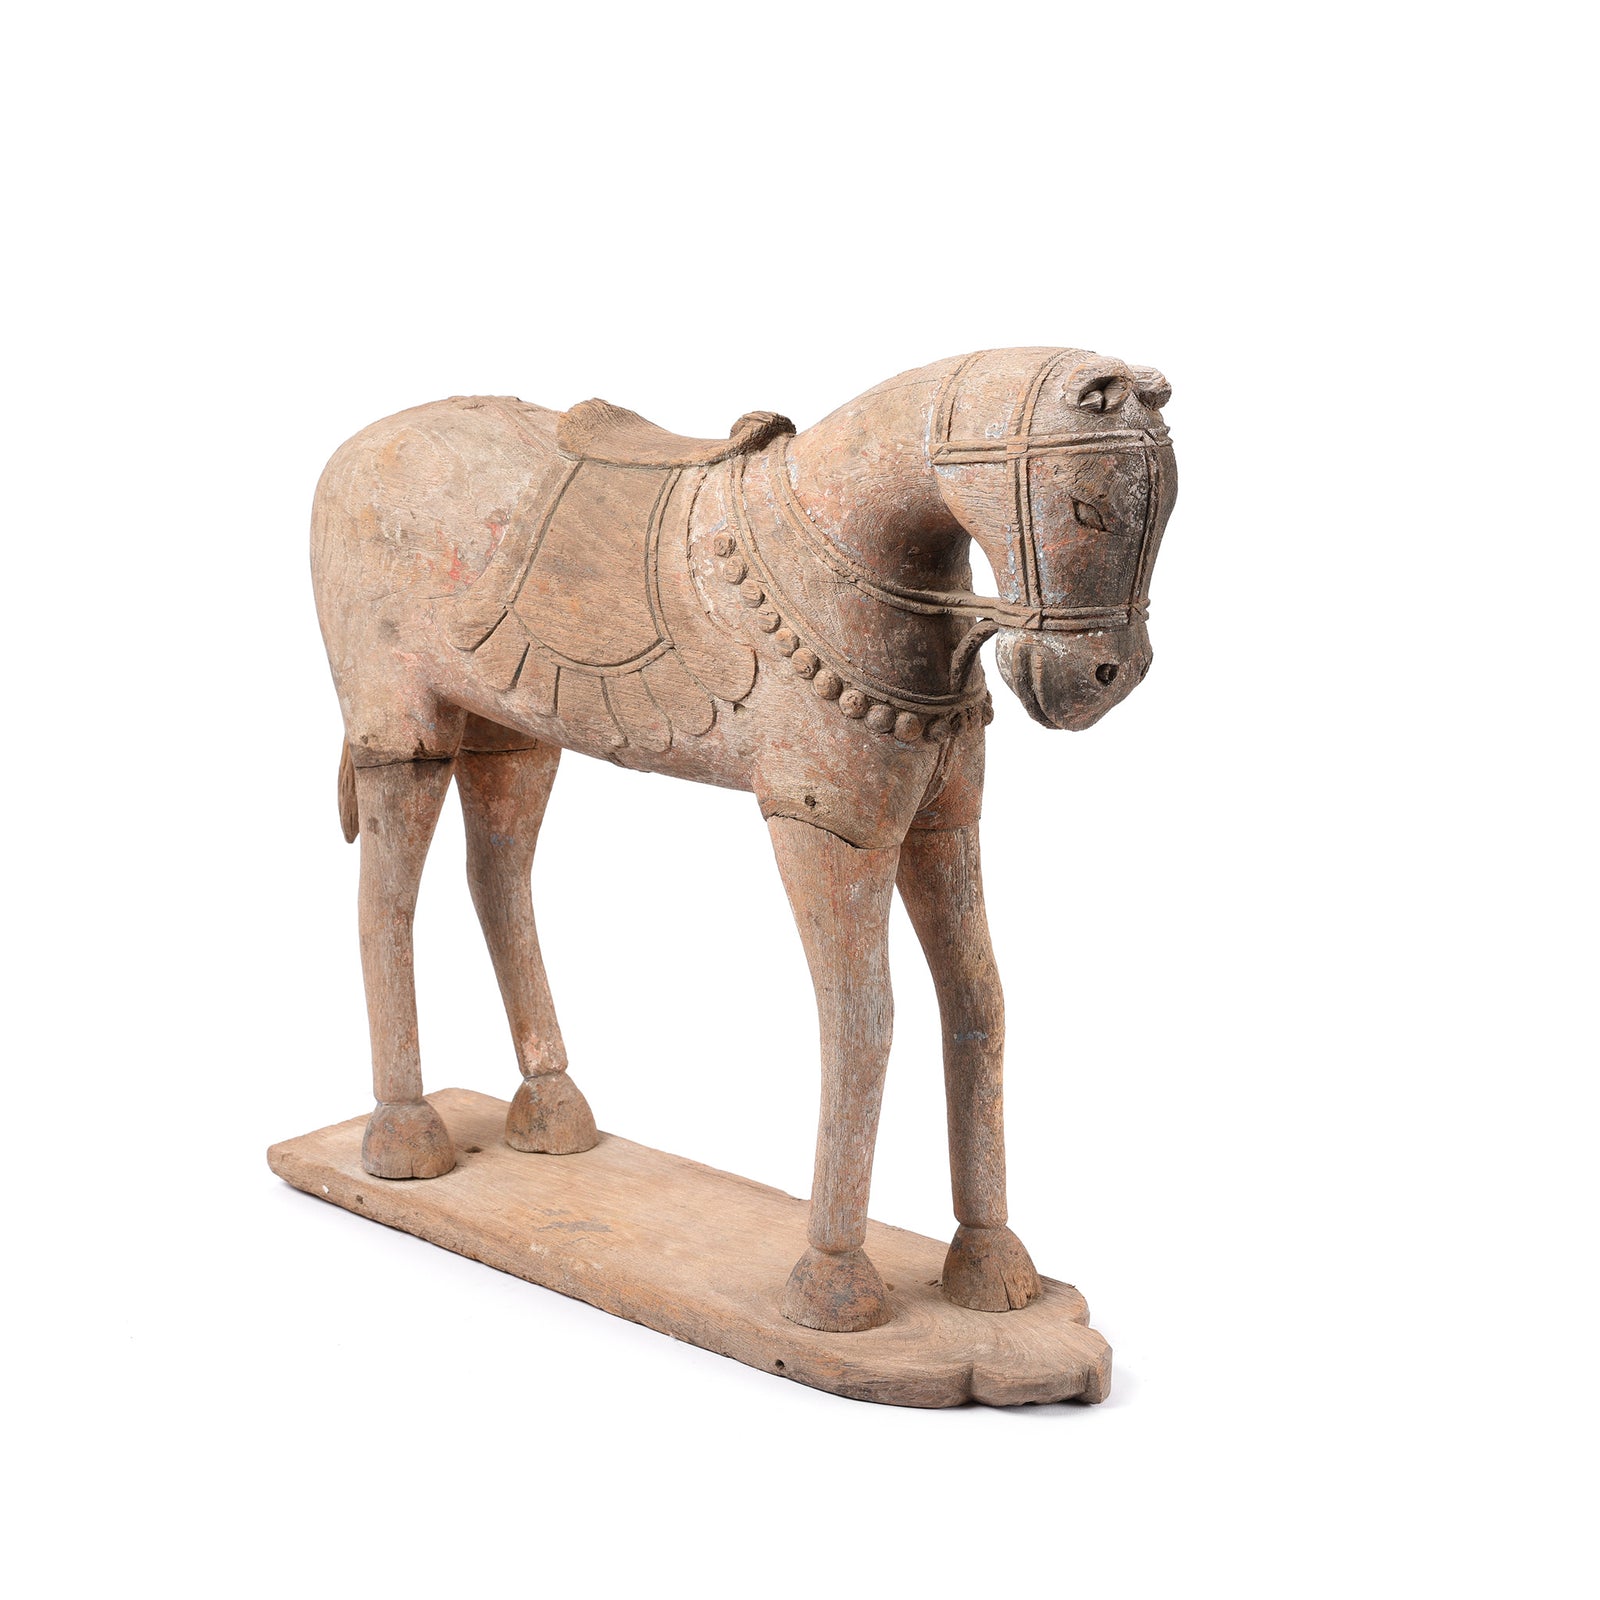 Antique Carved Teak Horse From The Rann Of Kutch - 19th Century | Indigo Antiques